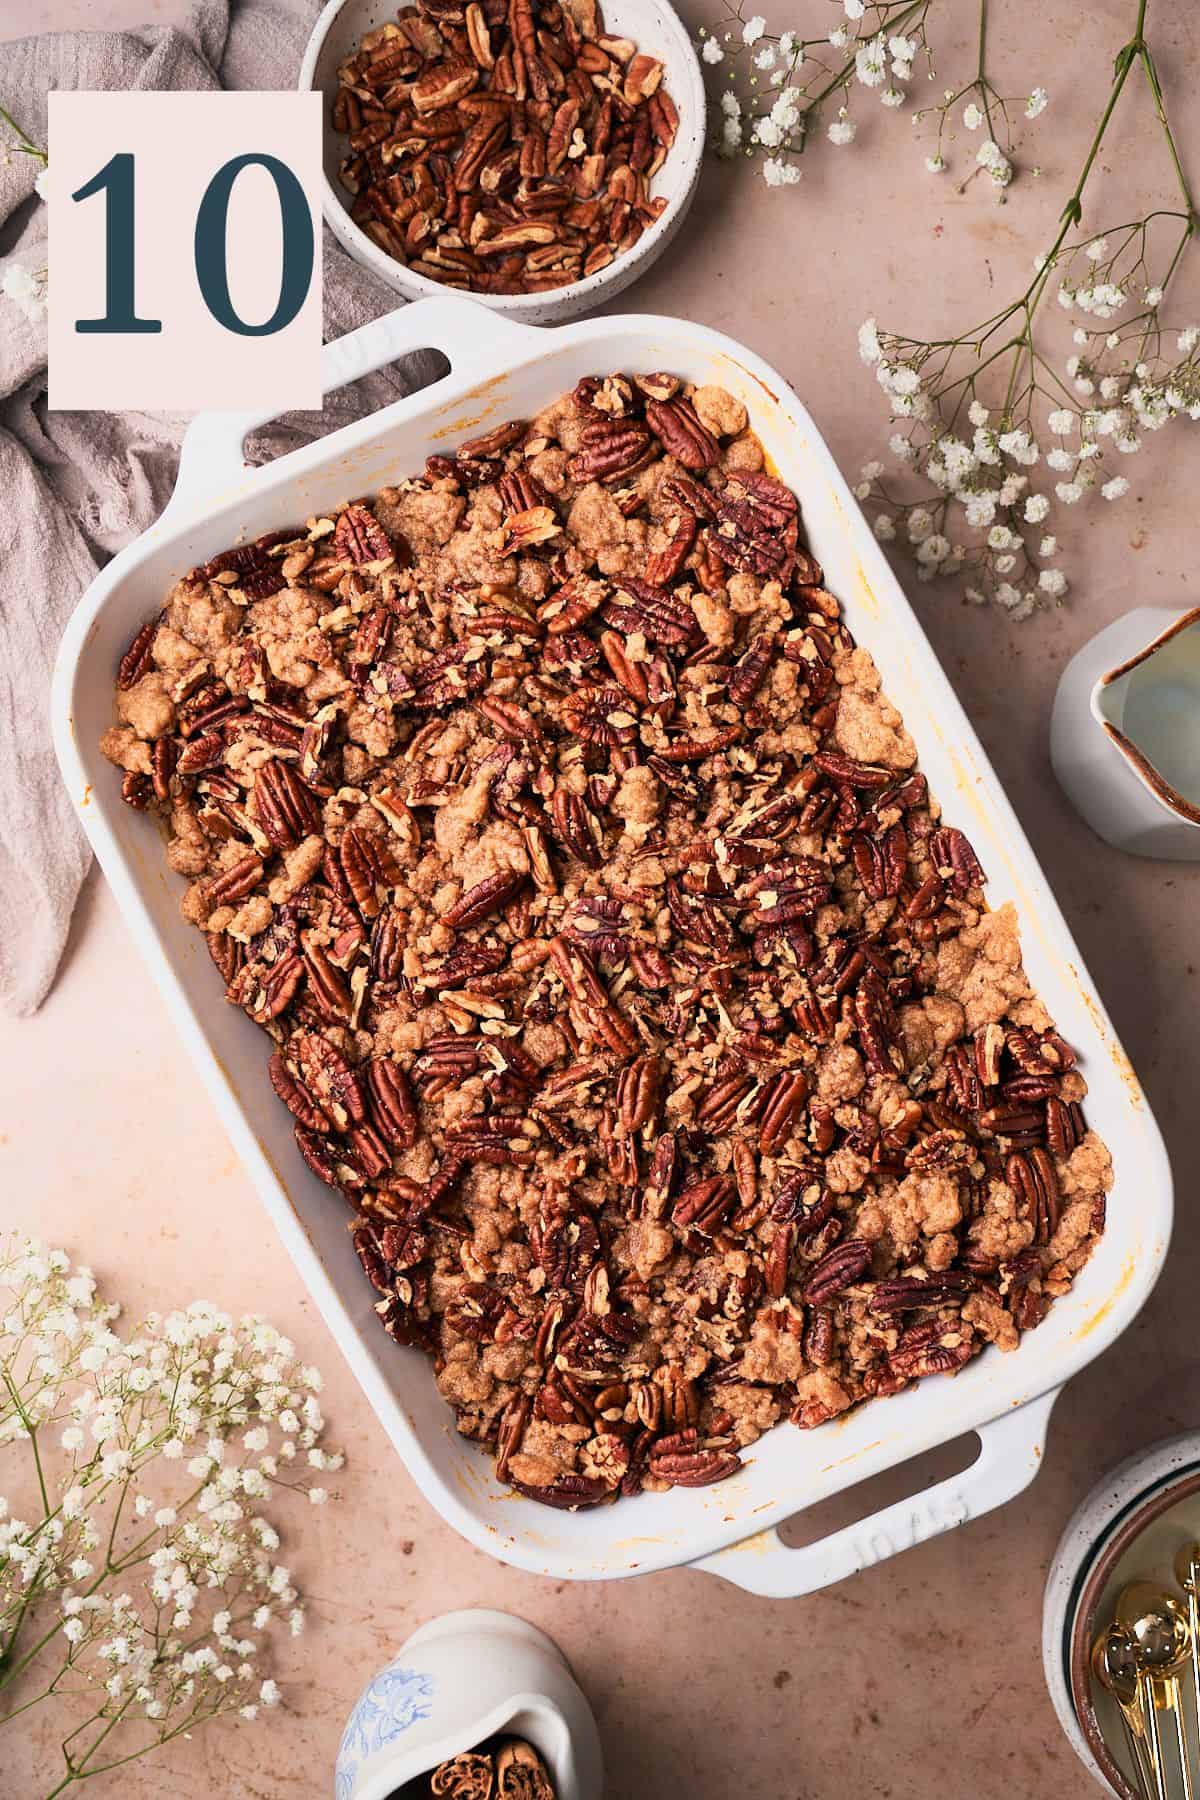 baked sweet potato casserole in a baking dish and ready to serve, surrounded by small white flowers, pecans, and cinnamon sticks.